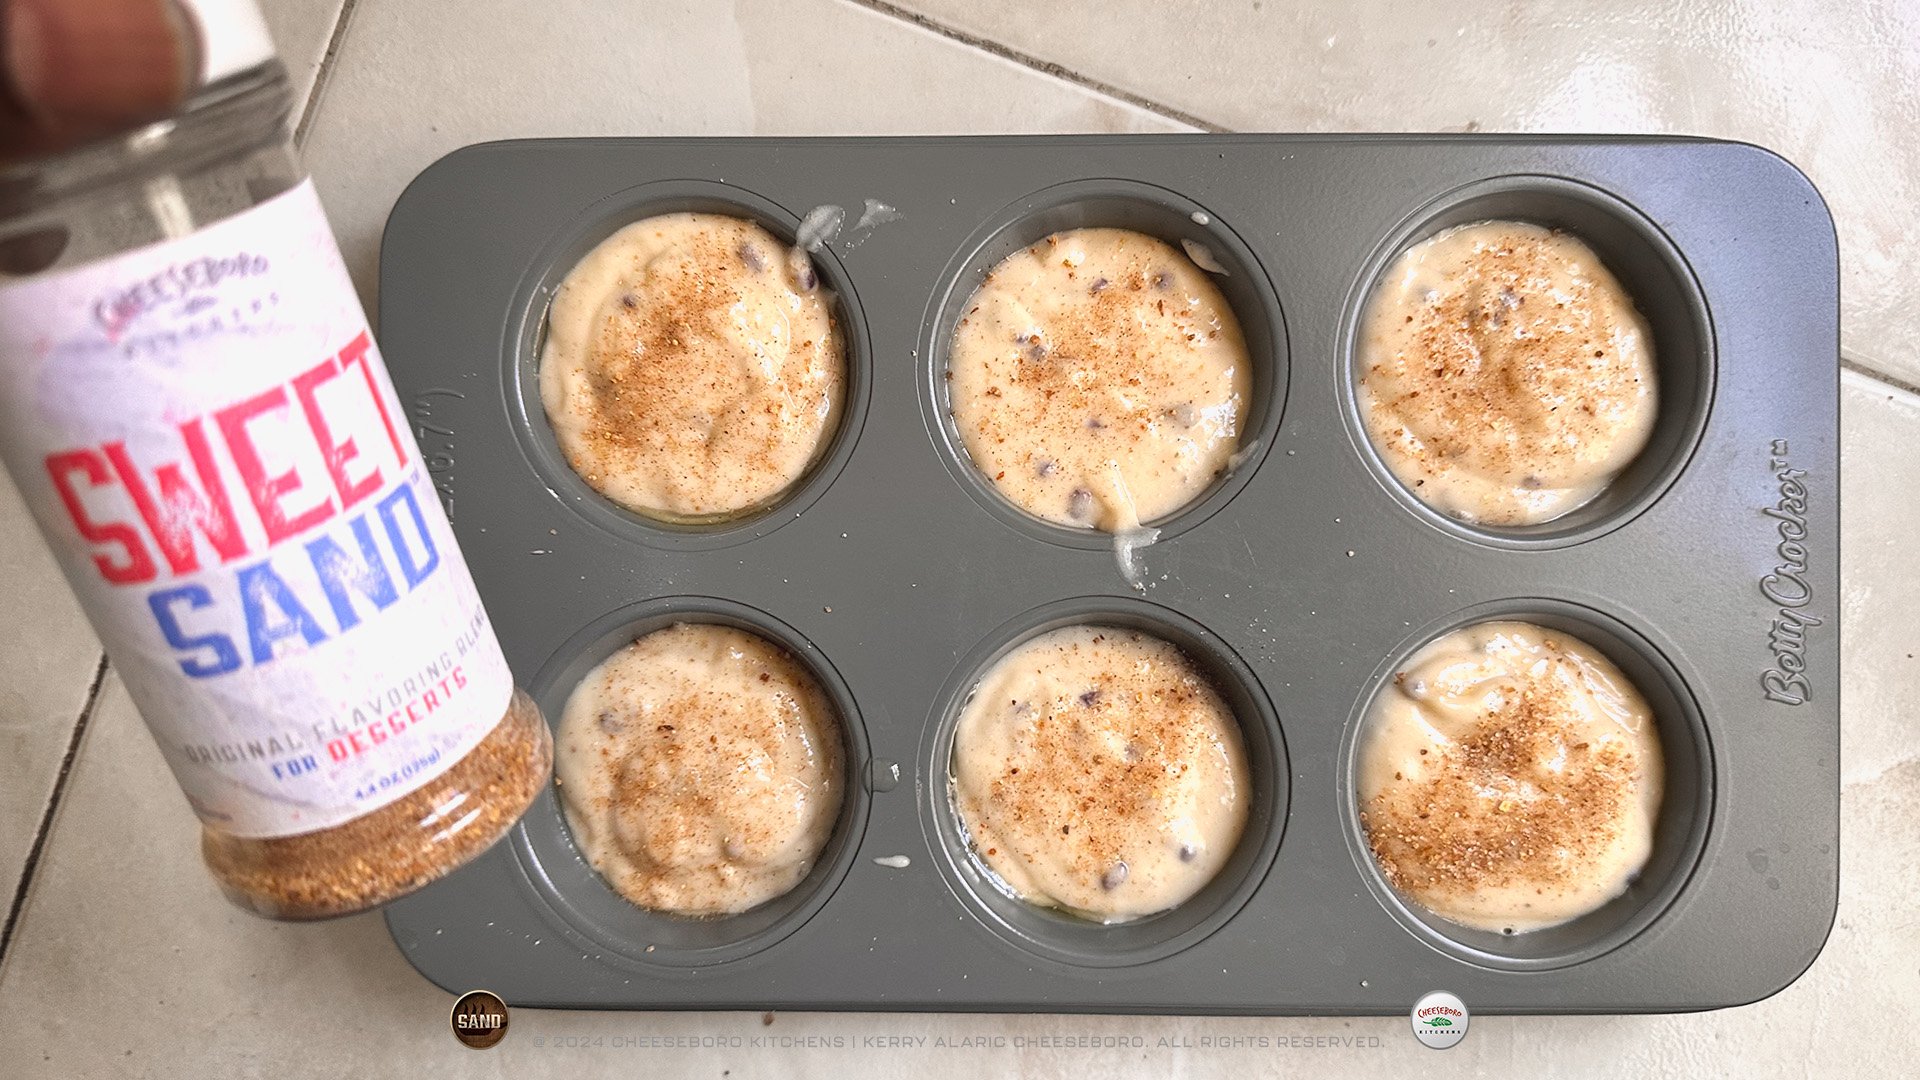 cheeskitch-240108-sands-sweet-banana-blueberry-muffins-batter-in-pan-with-jar-1-1920-hor.jpg